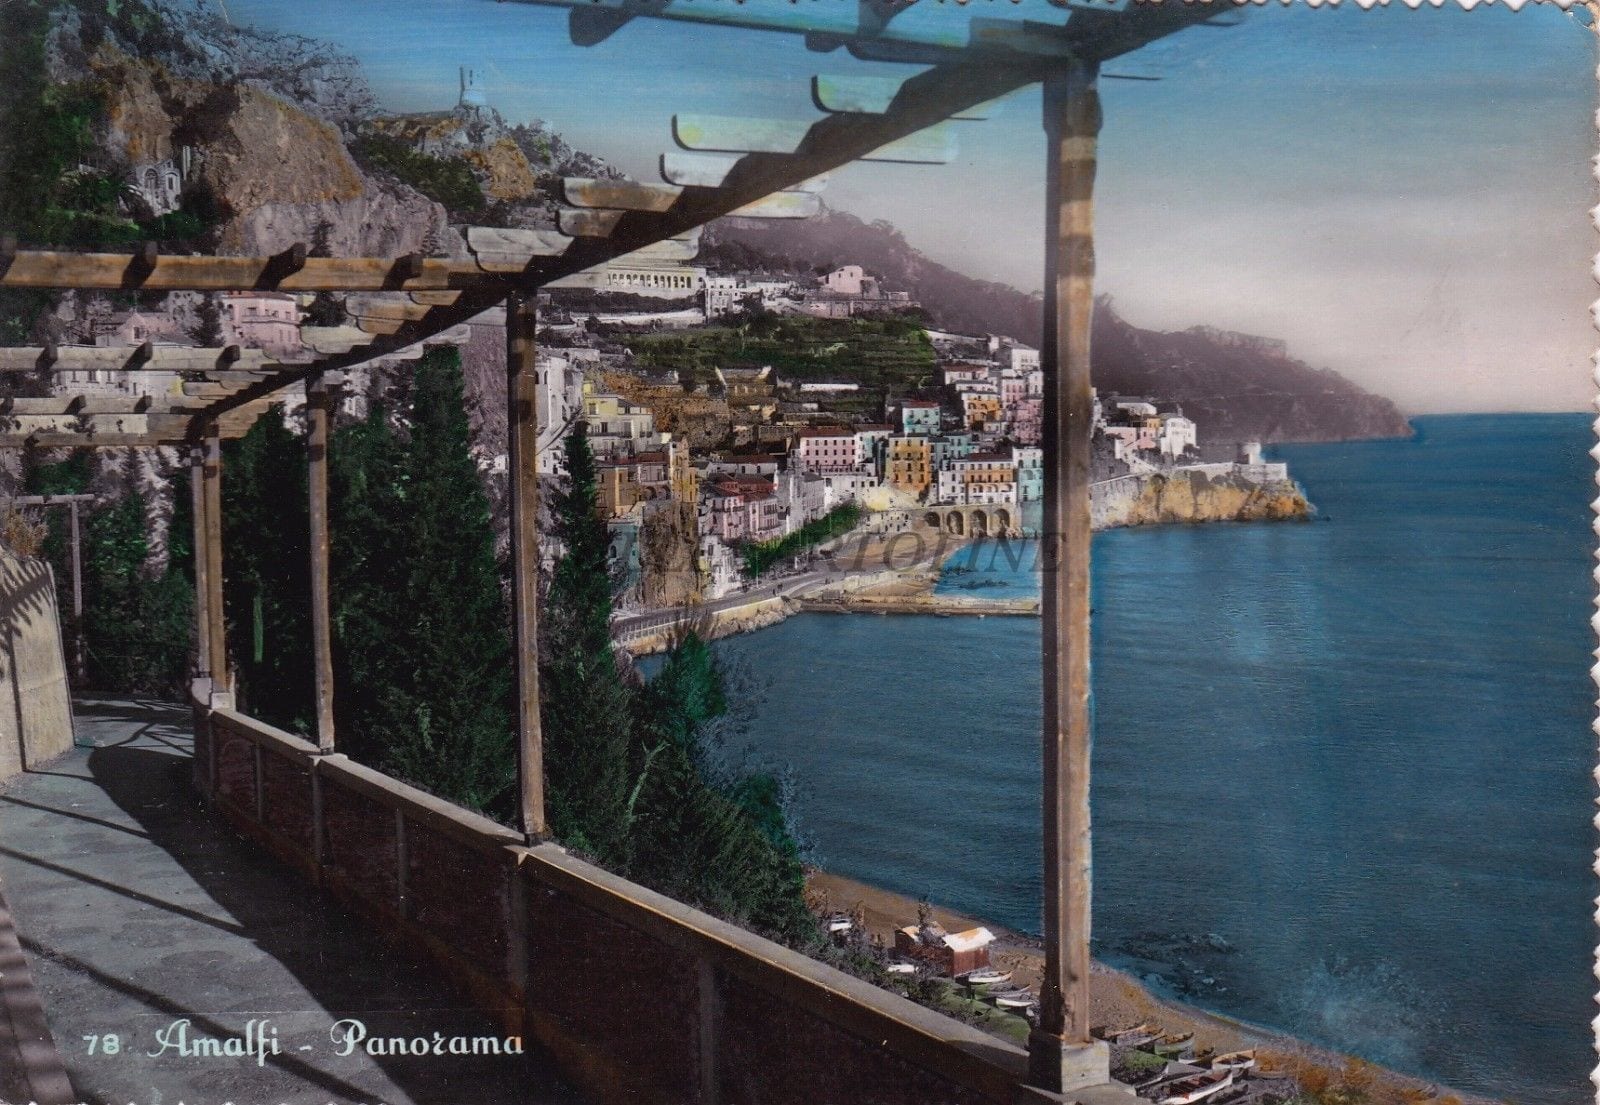 View of Amalfi from the terrace of the present Grand Hotel Convento 1953.